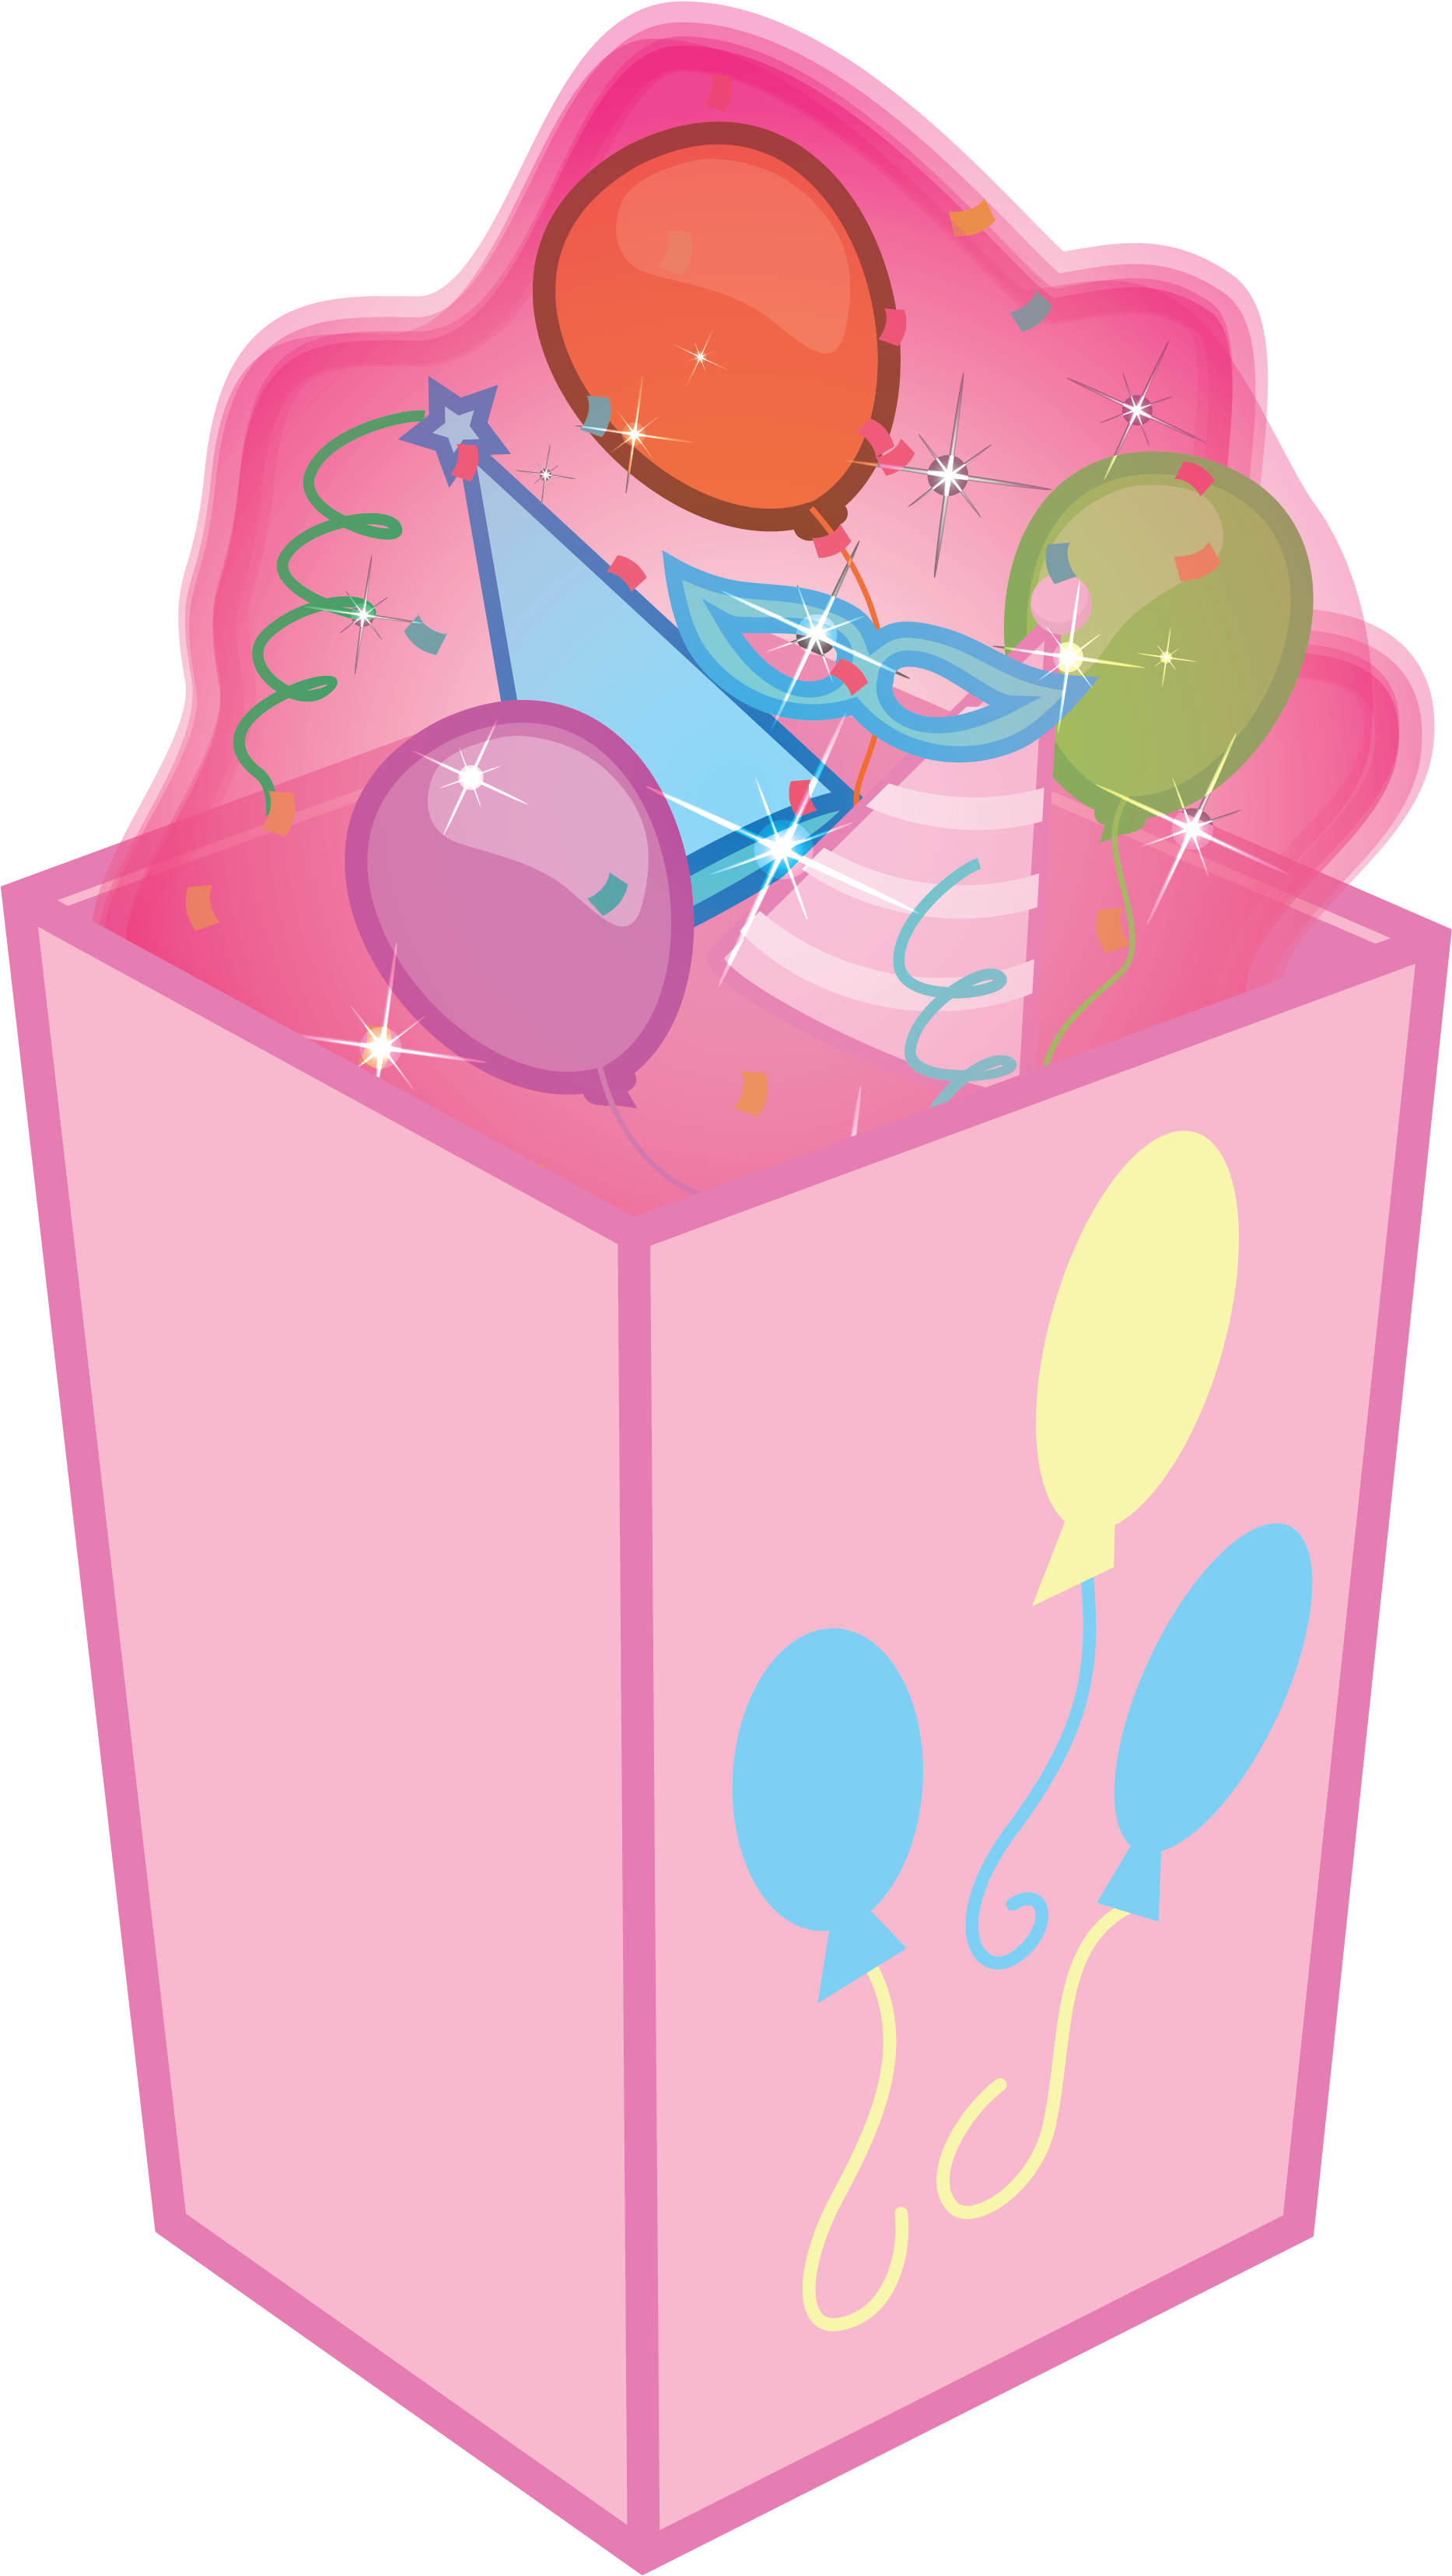 By Helping Pinkie Pie Support Birthday Dreams, You - By Helping Pinkie Pie Support Birthday Dreams, You (2813x3738)